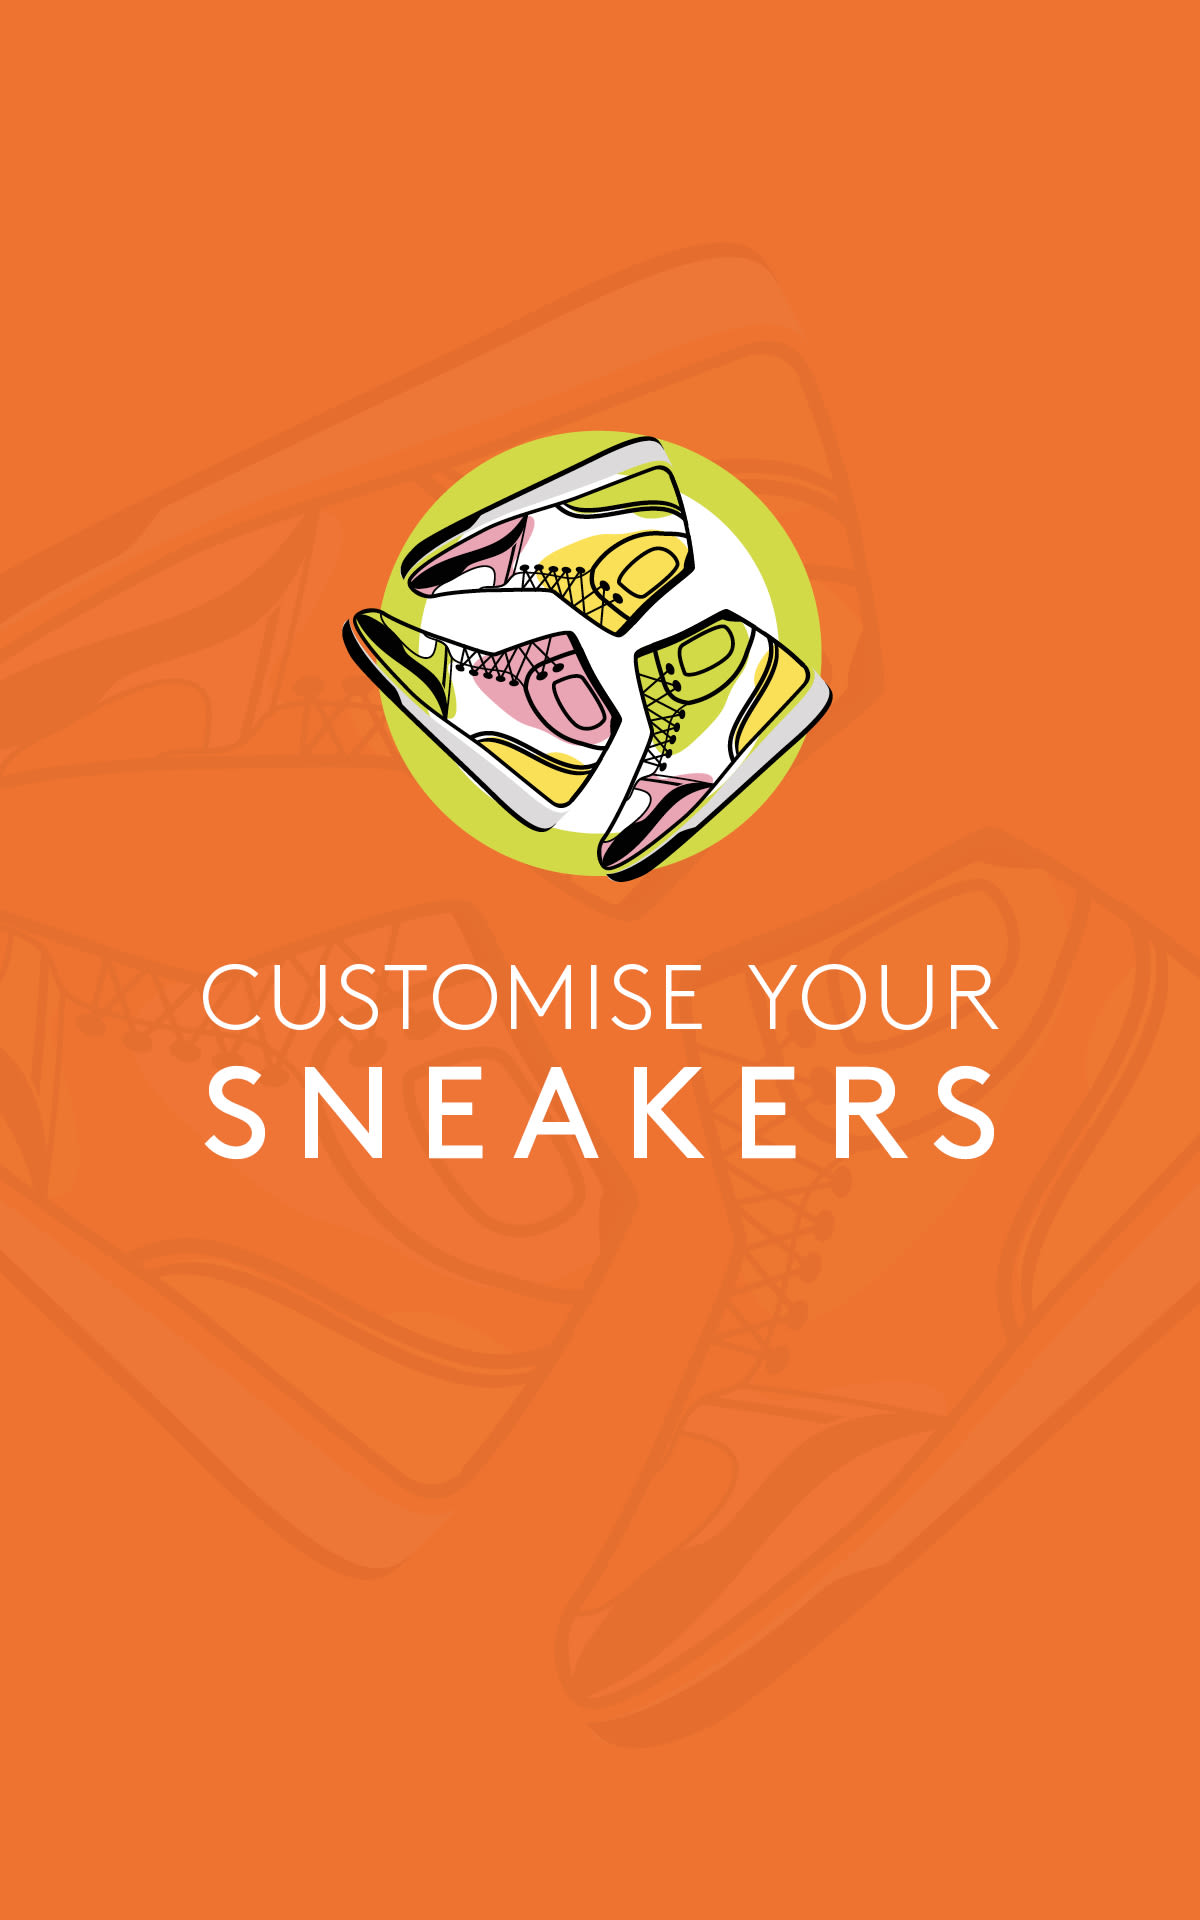 Customise your sneakers